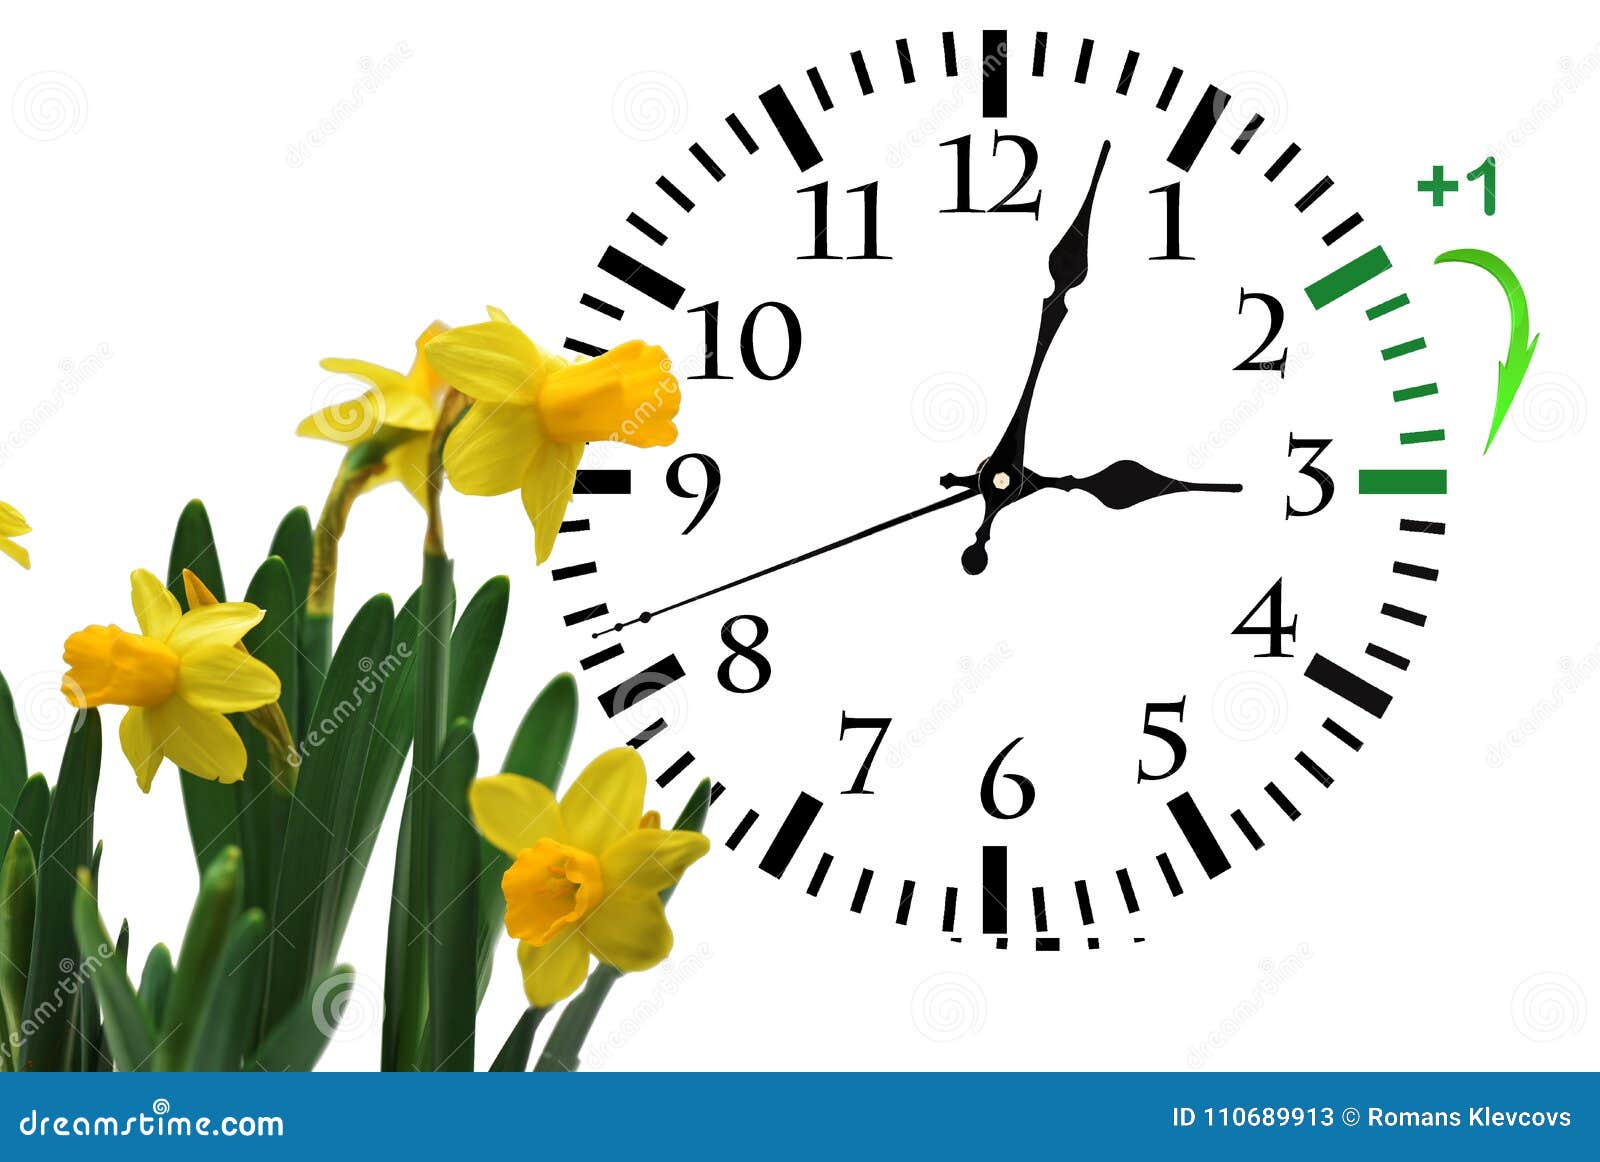 Daylight Saving Time. Change clock to summer time. - Stock Image -  Everypixel